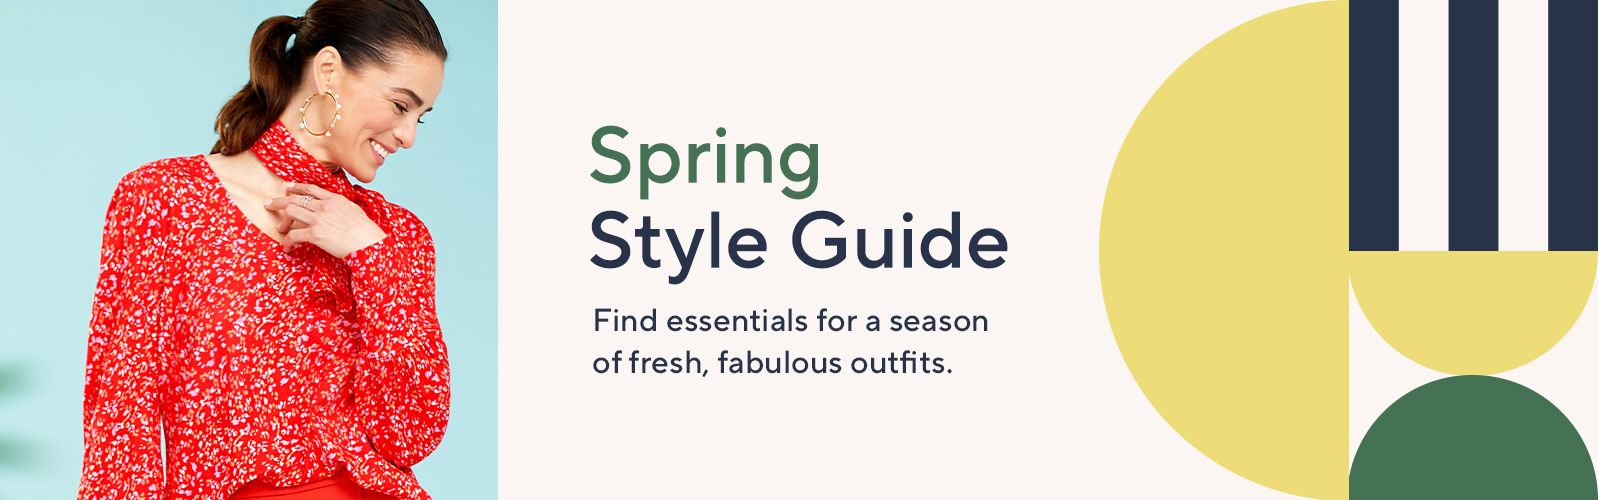 Spring Style Guide: Find essentials for a season of fresh, fabulous outfits.